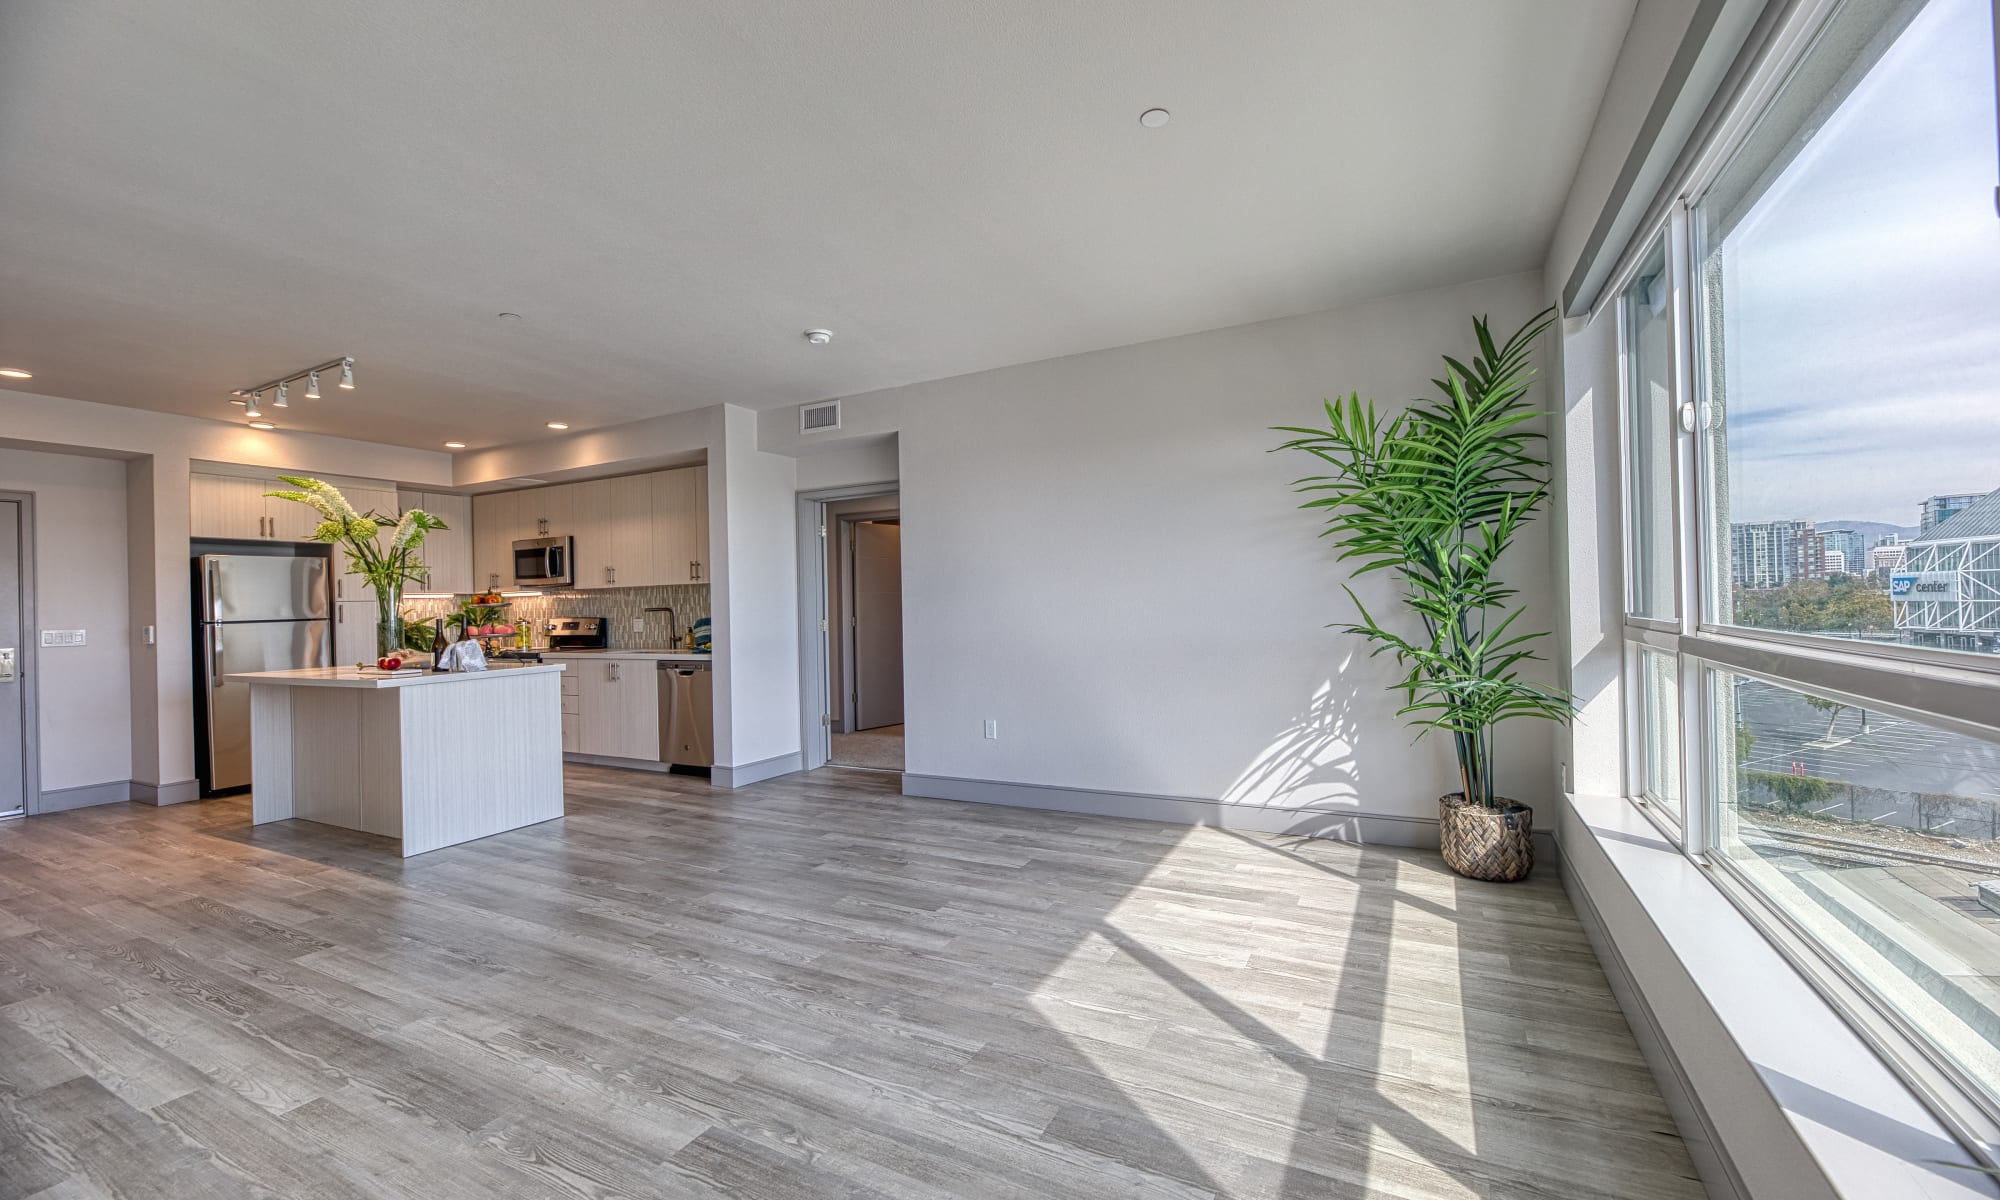 Spacious living room and kitchen featuring breakfast bar at Vespaio in San Jose, California